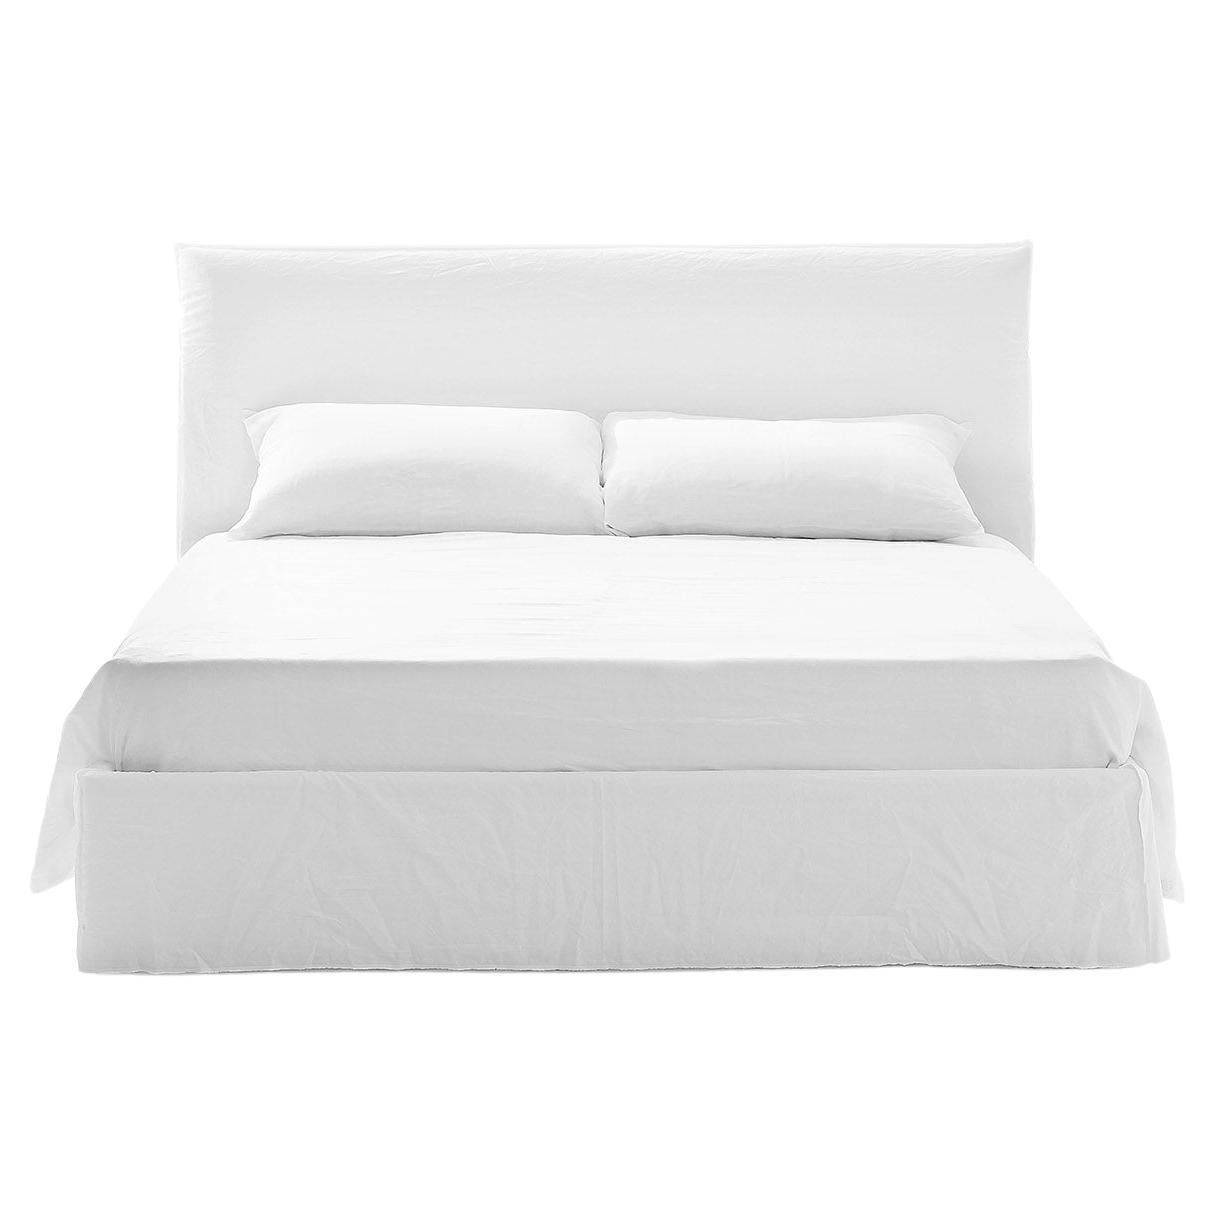 Gervasoni Ghost 80 G Knock Down Bed in White Linen Upholstery by Paola Navone